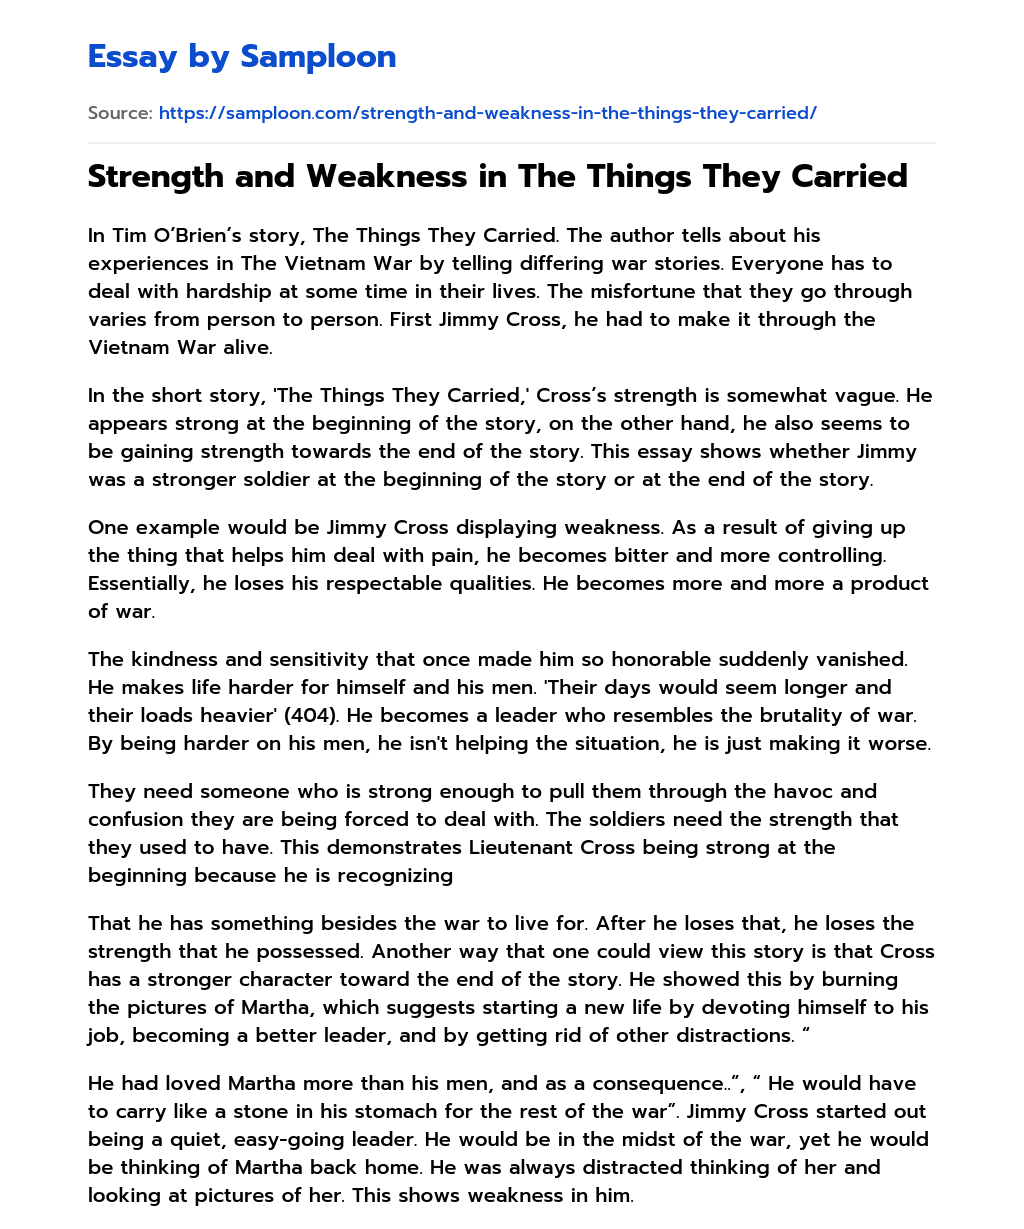 Strength and Weakness in The Things They Carried essay